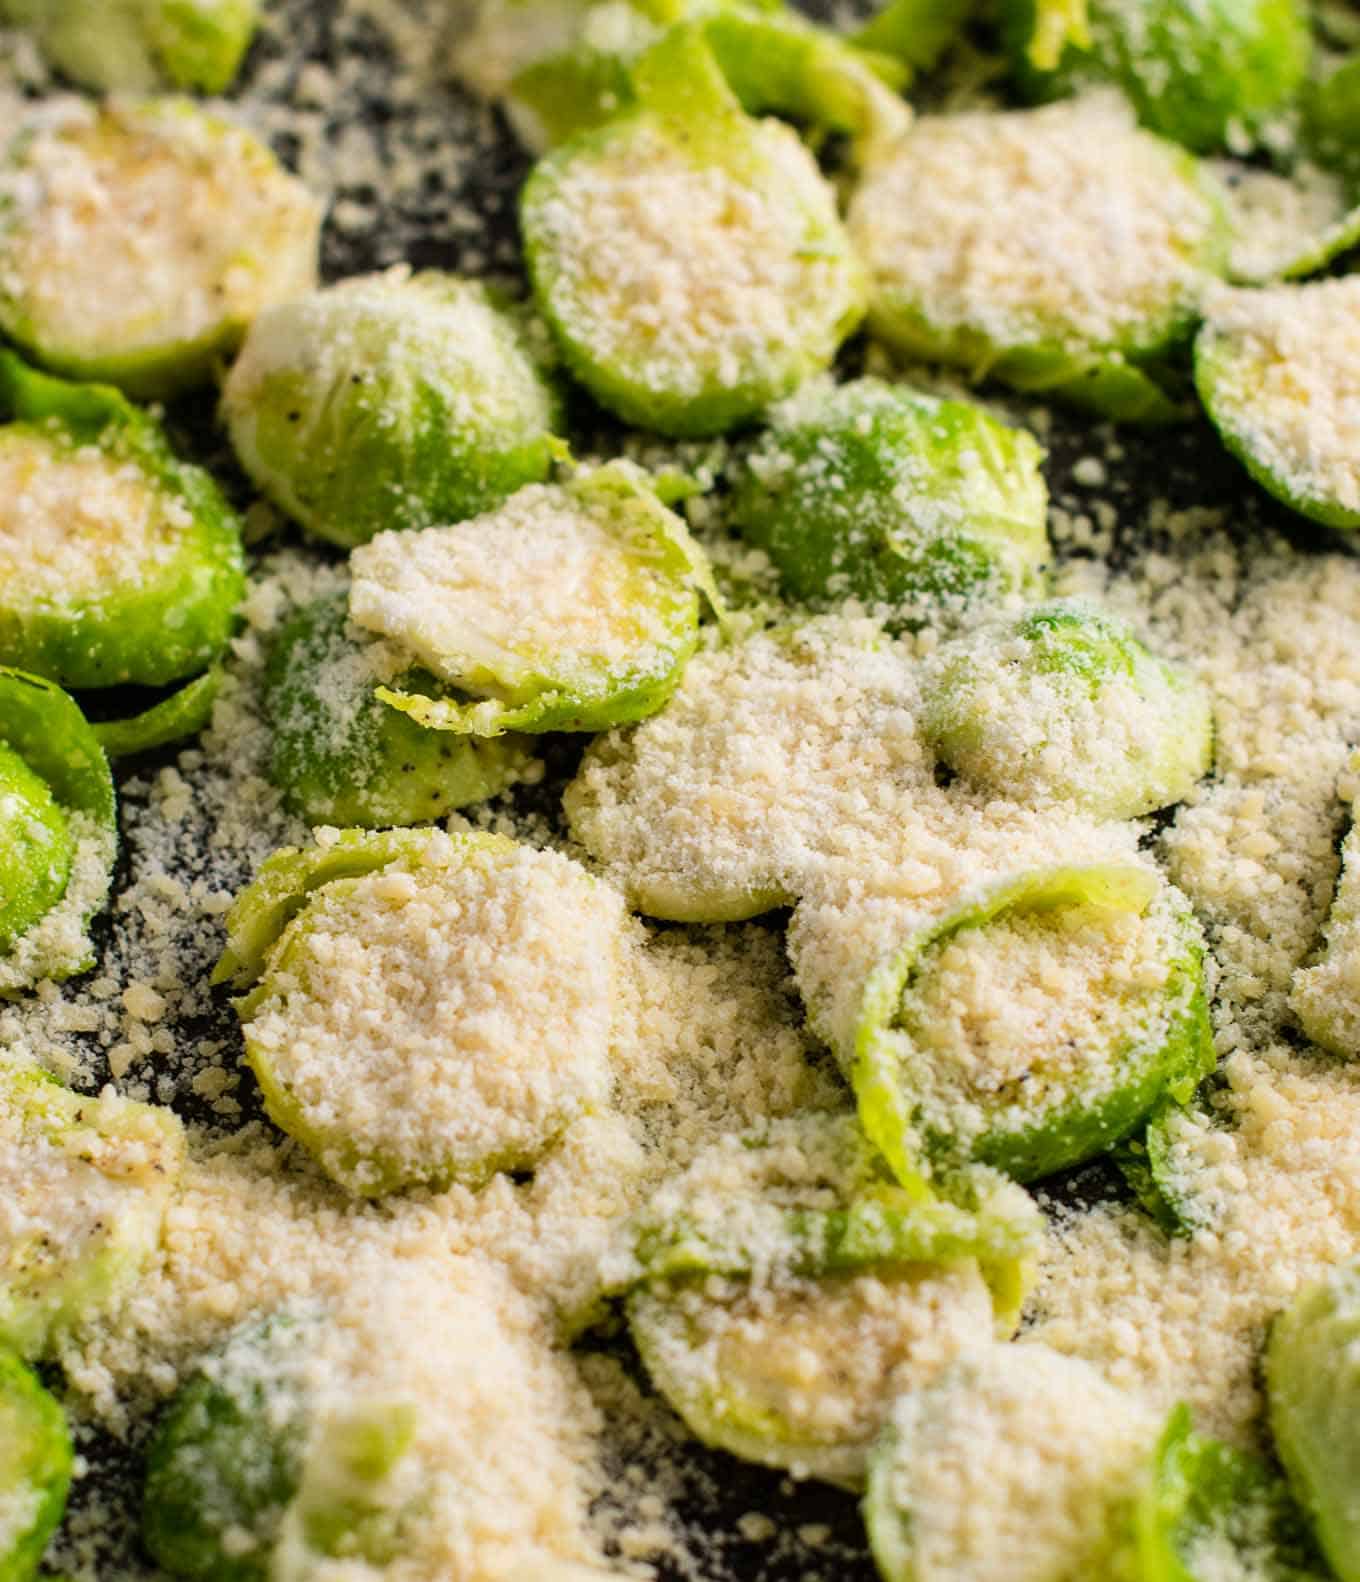 brussel sprout recipe these are so good I could eat the whole pan myself! #brusselsprouts #brusselsproutchips #dinner #sidedish #vegetarian